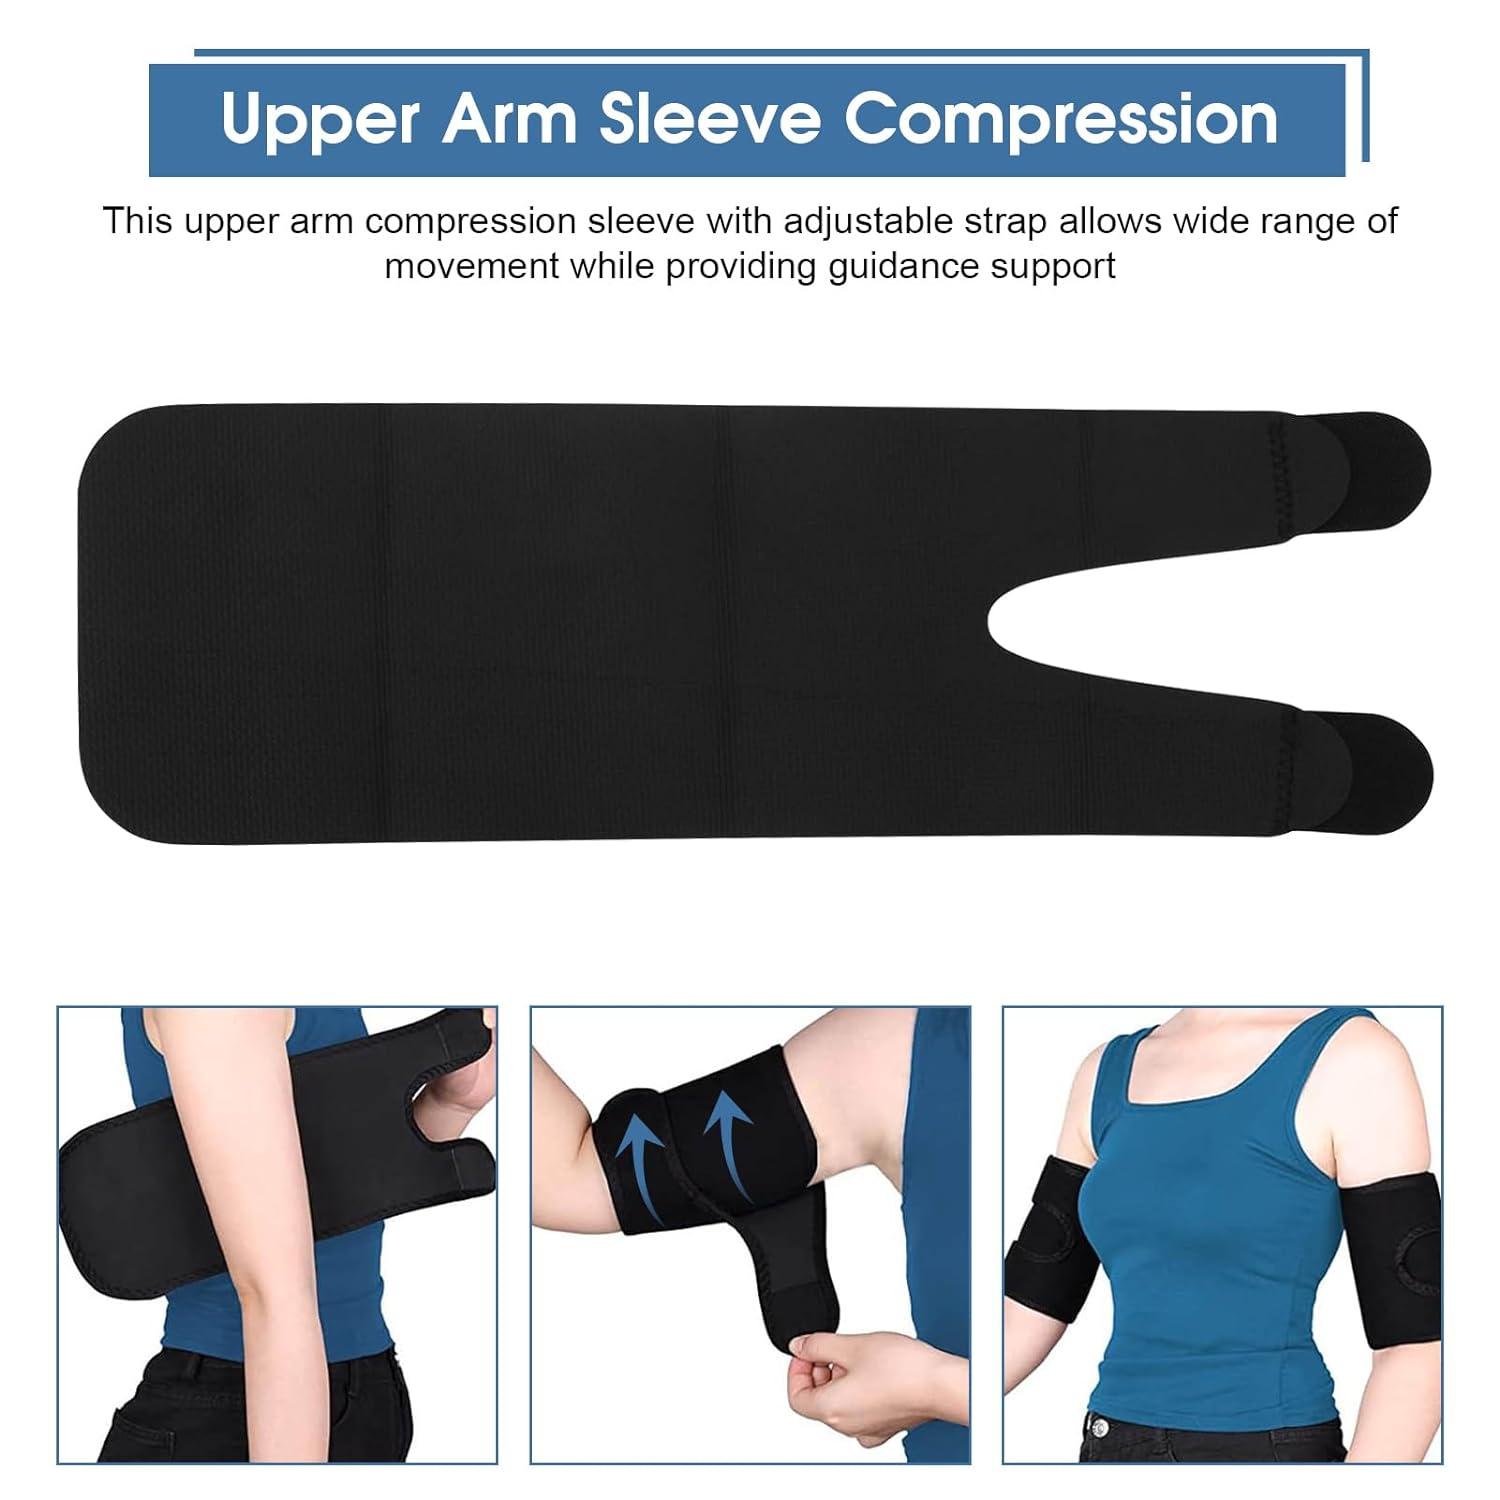 Upper Arm Sleeve Compression Bicep Tendonitis Brace Compression Sleeve  Adjustable Elbow Brace Arm Support Wrap for Upper Arm